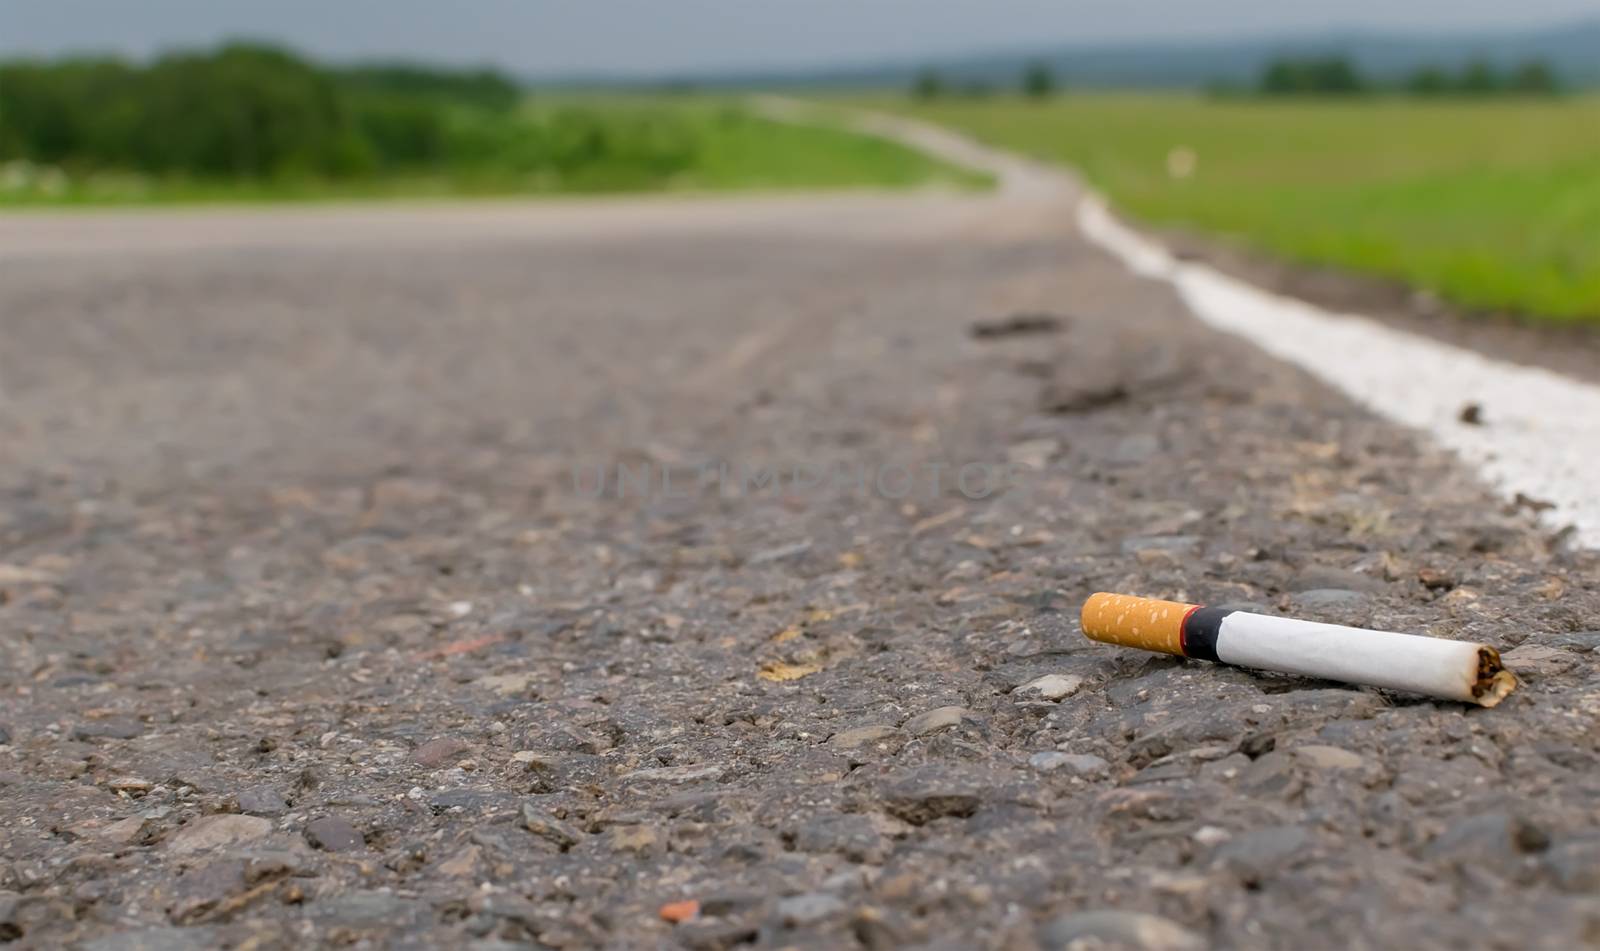 View of cigarette lying on the asphalt on a country road by jk3030